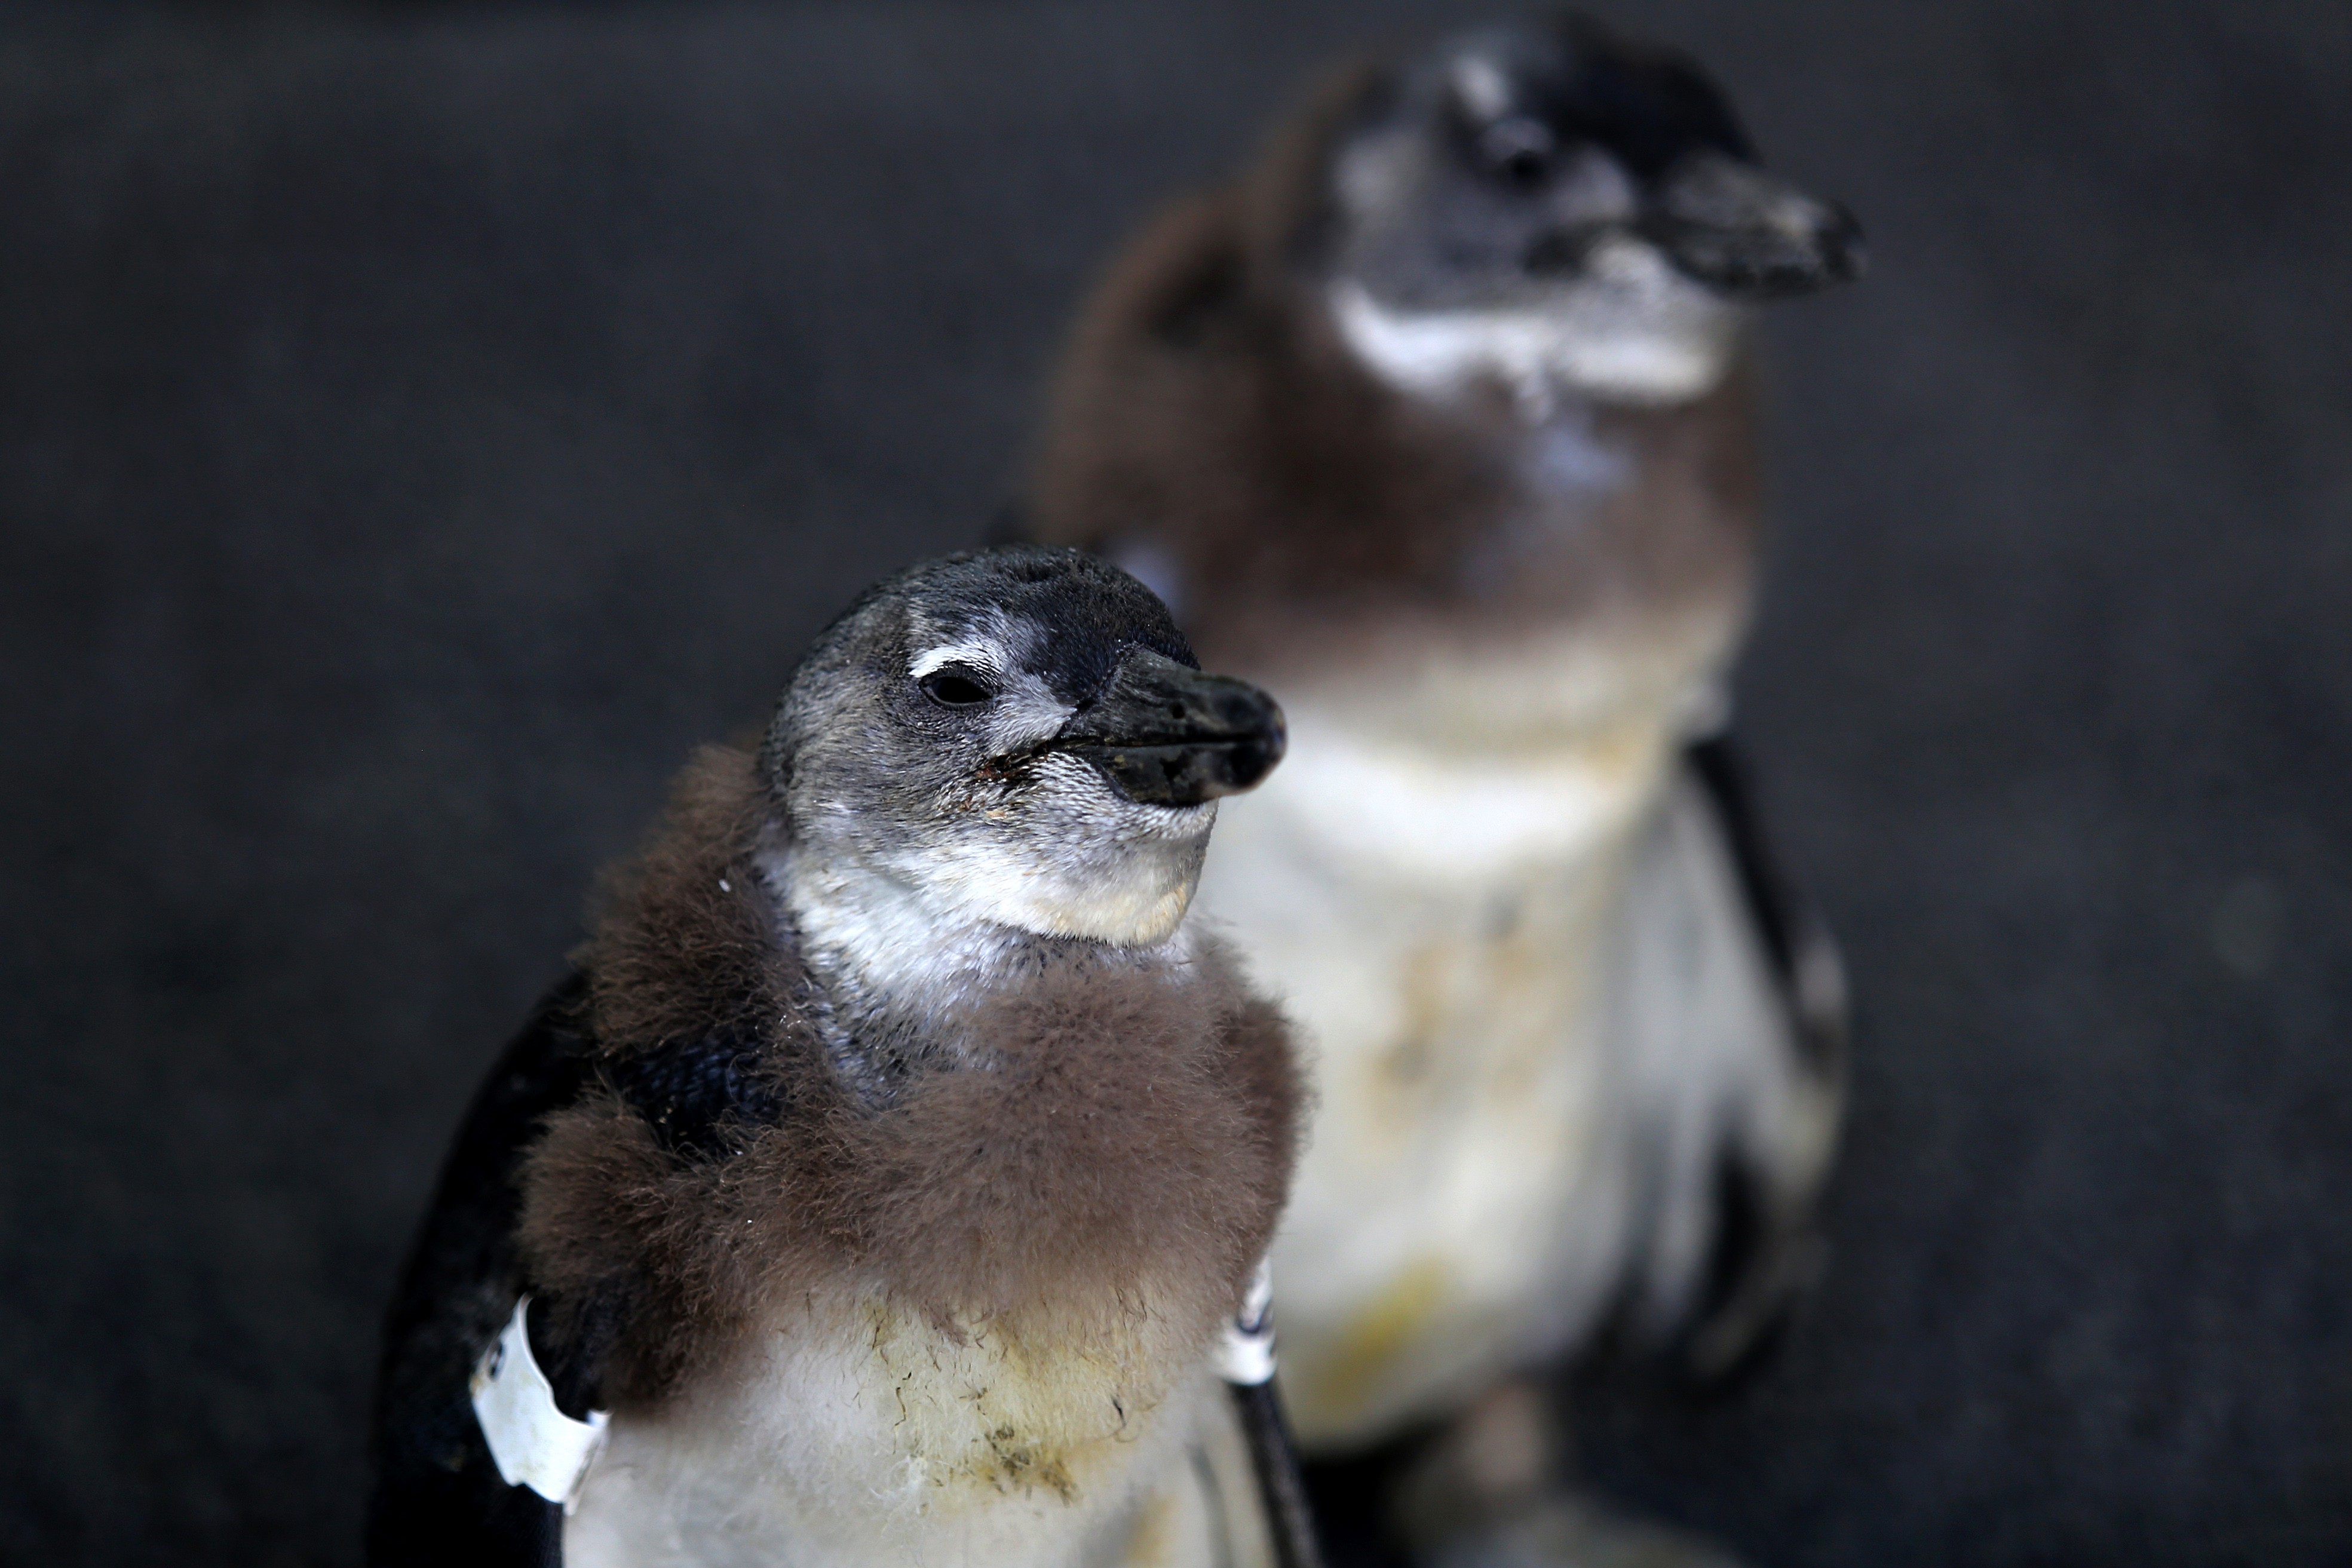 African penguin chicks at the Southern African Foundation for the Conservation of Coastal Birds (SANCCOB) in Cape Town in a photo taken on November 30, 2013. Photo: AFP/ File